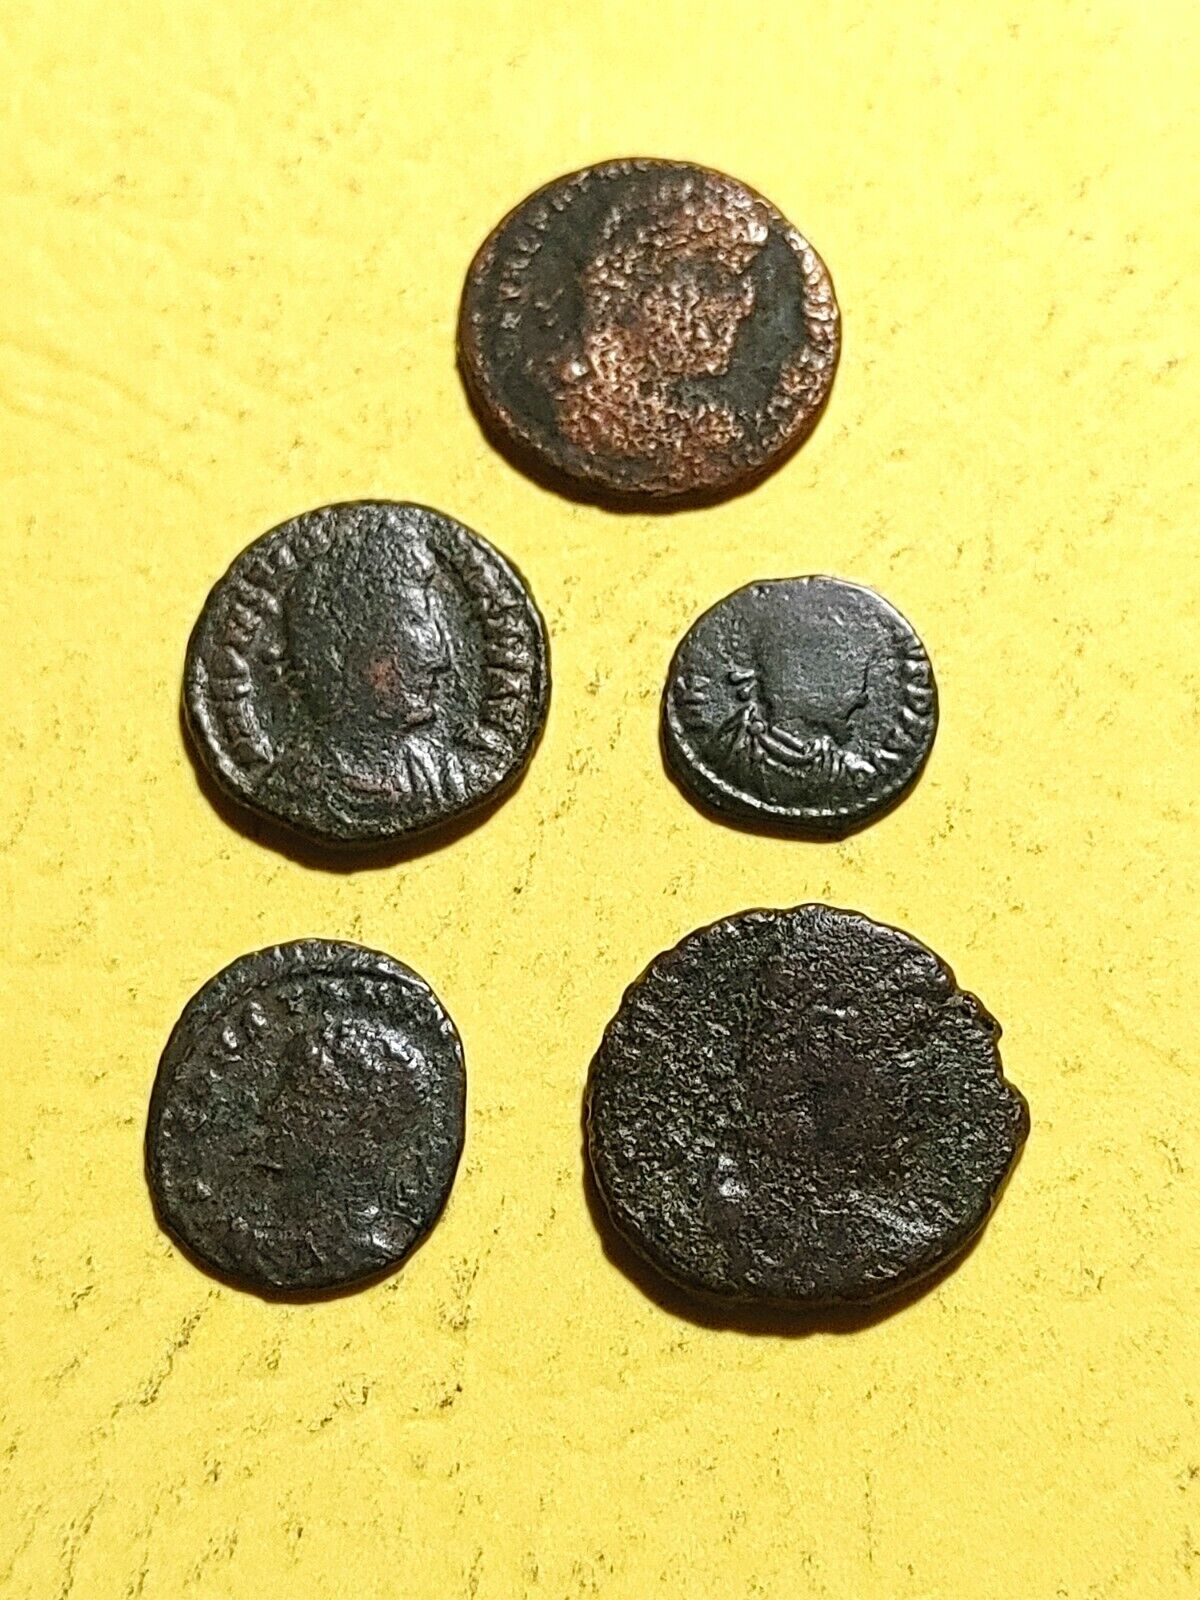 Ancient Roman Coin Lot. Nice Ranking 2021 autumn and winter new TOP20 Lots Details. With Piece Of